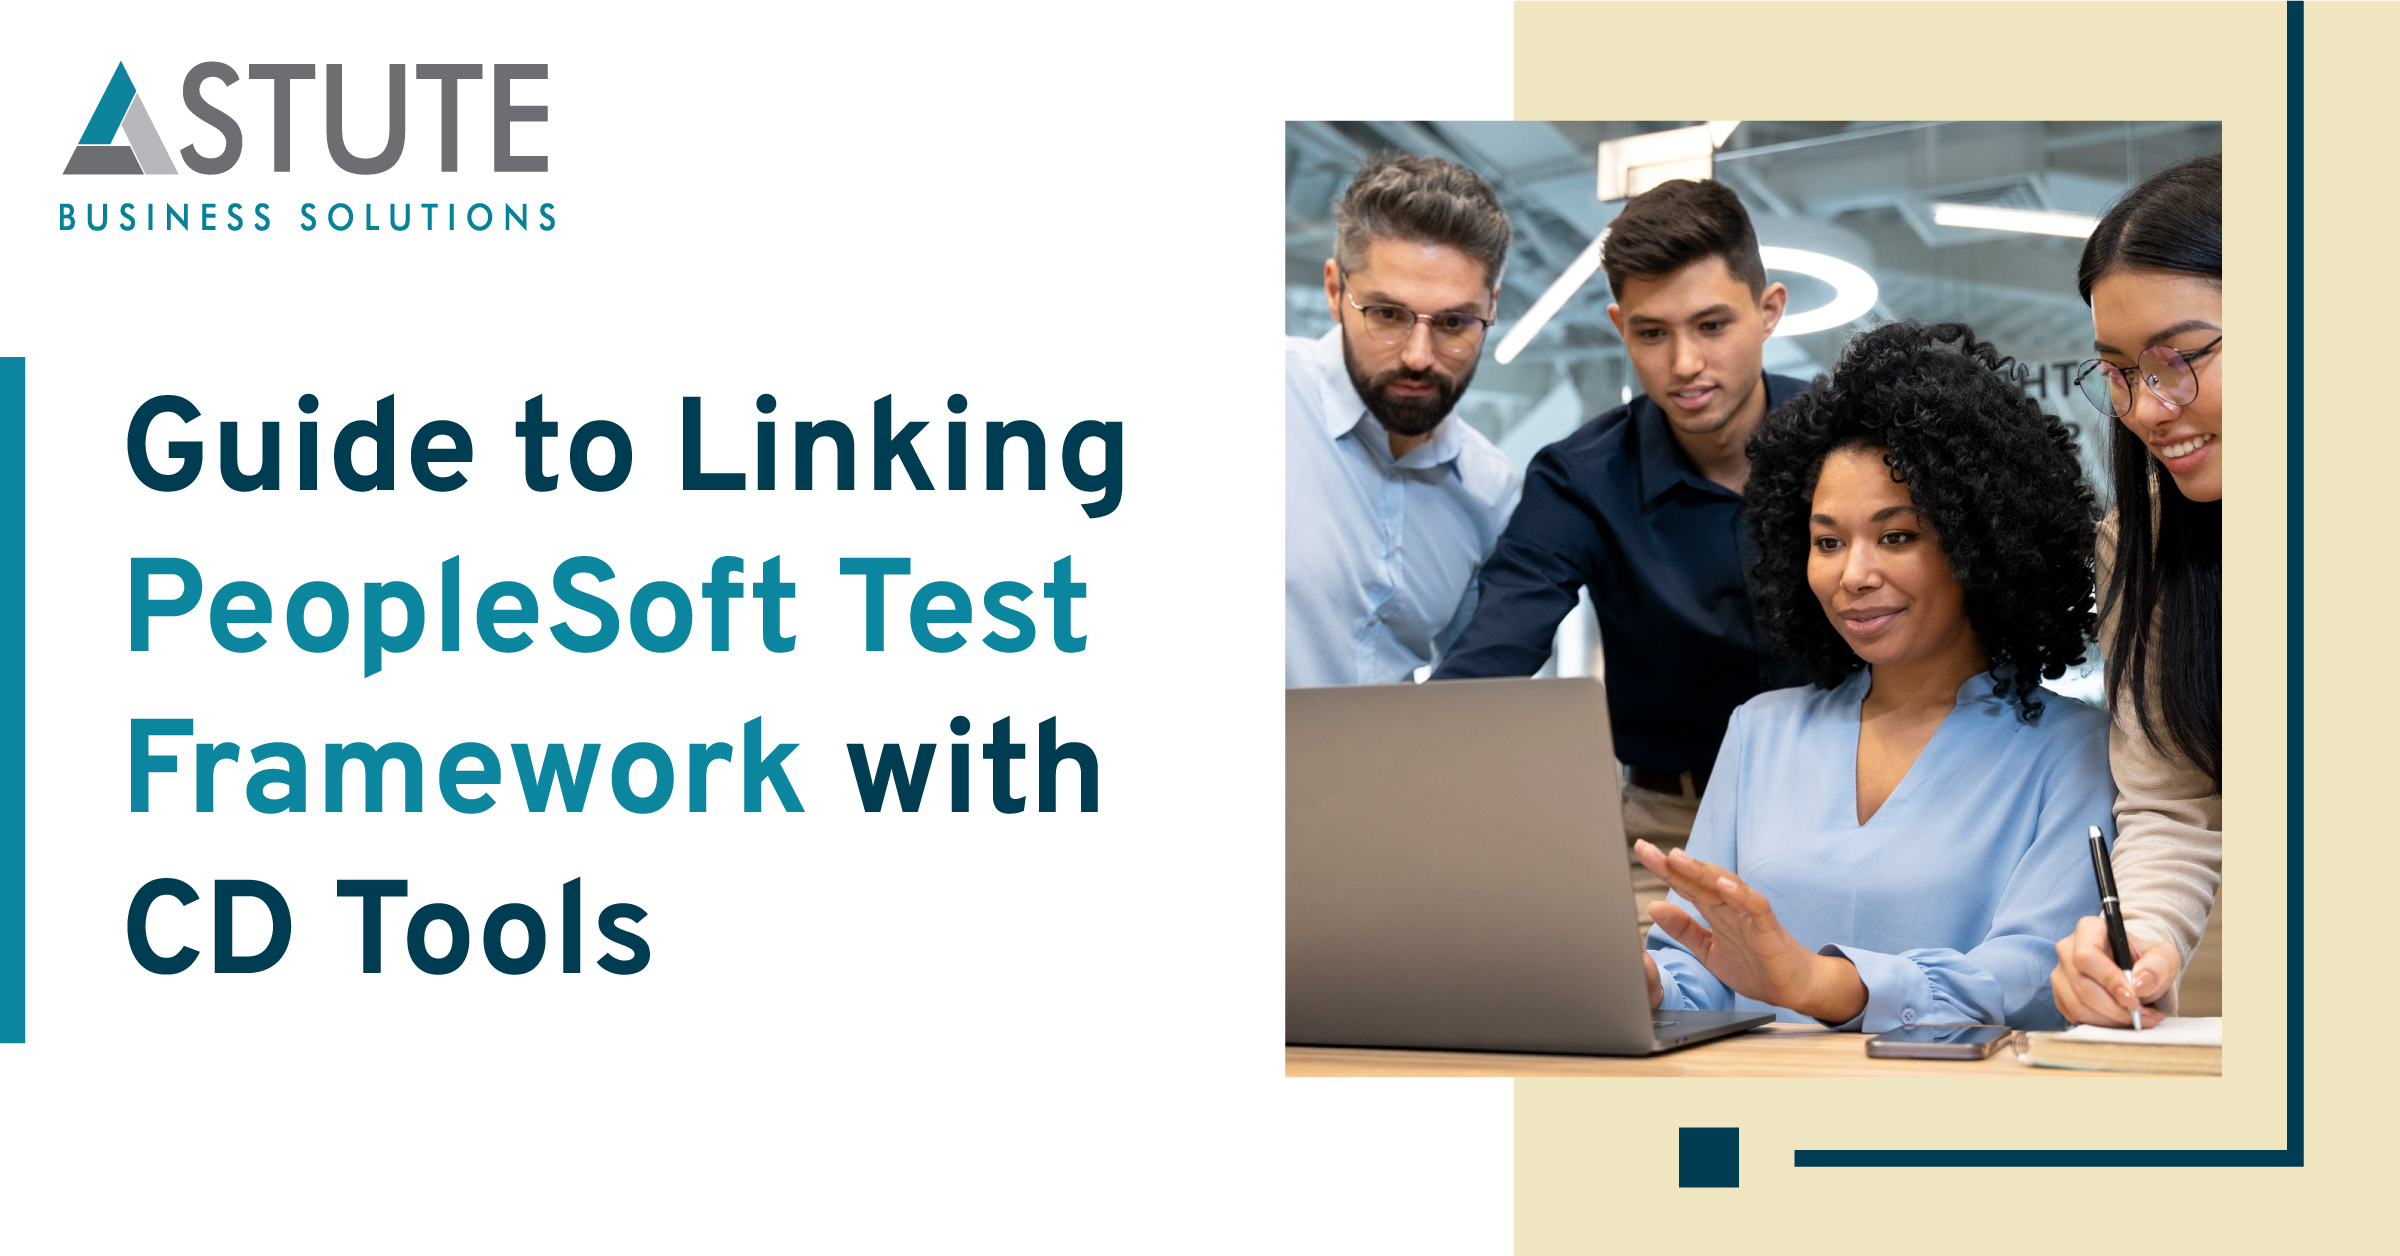 Guide to Linking PeopleSoft Test Framework with CD Tools